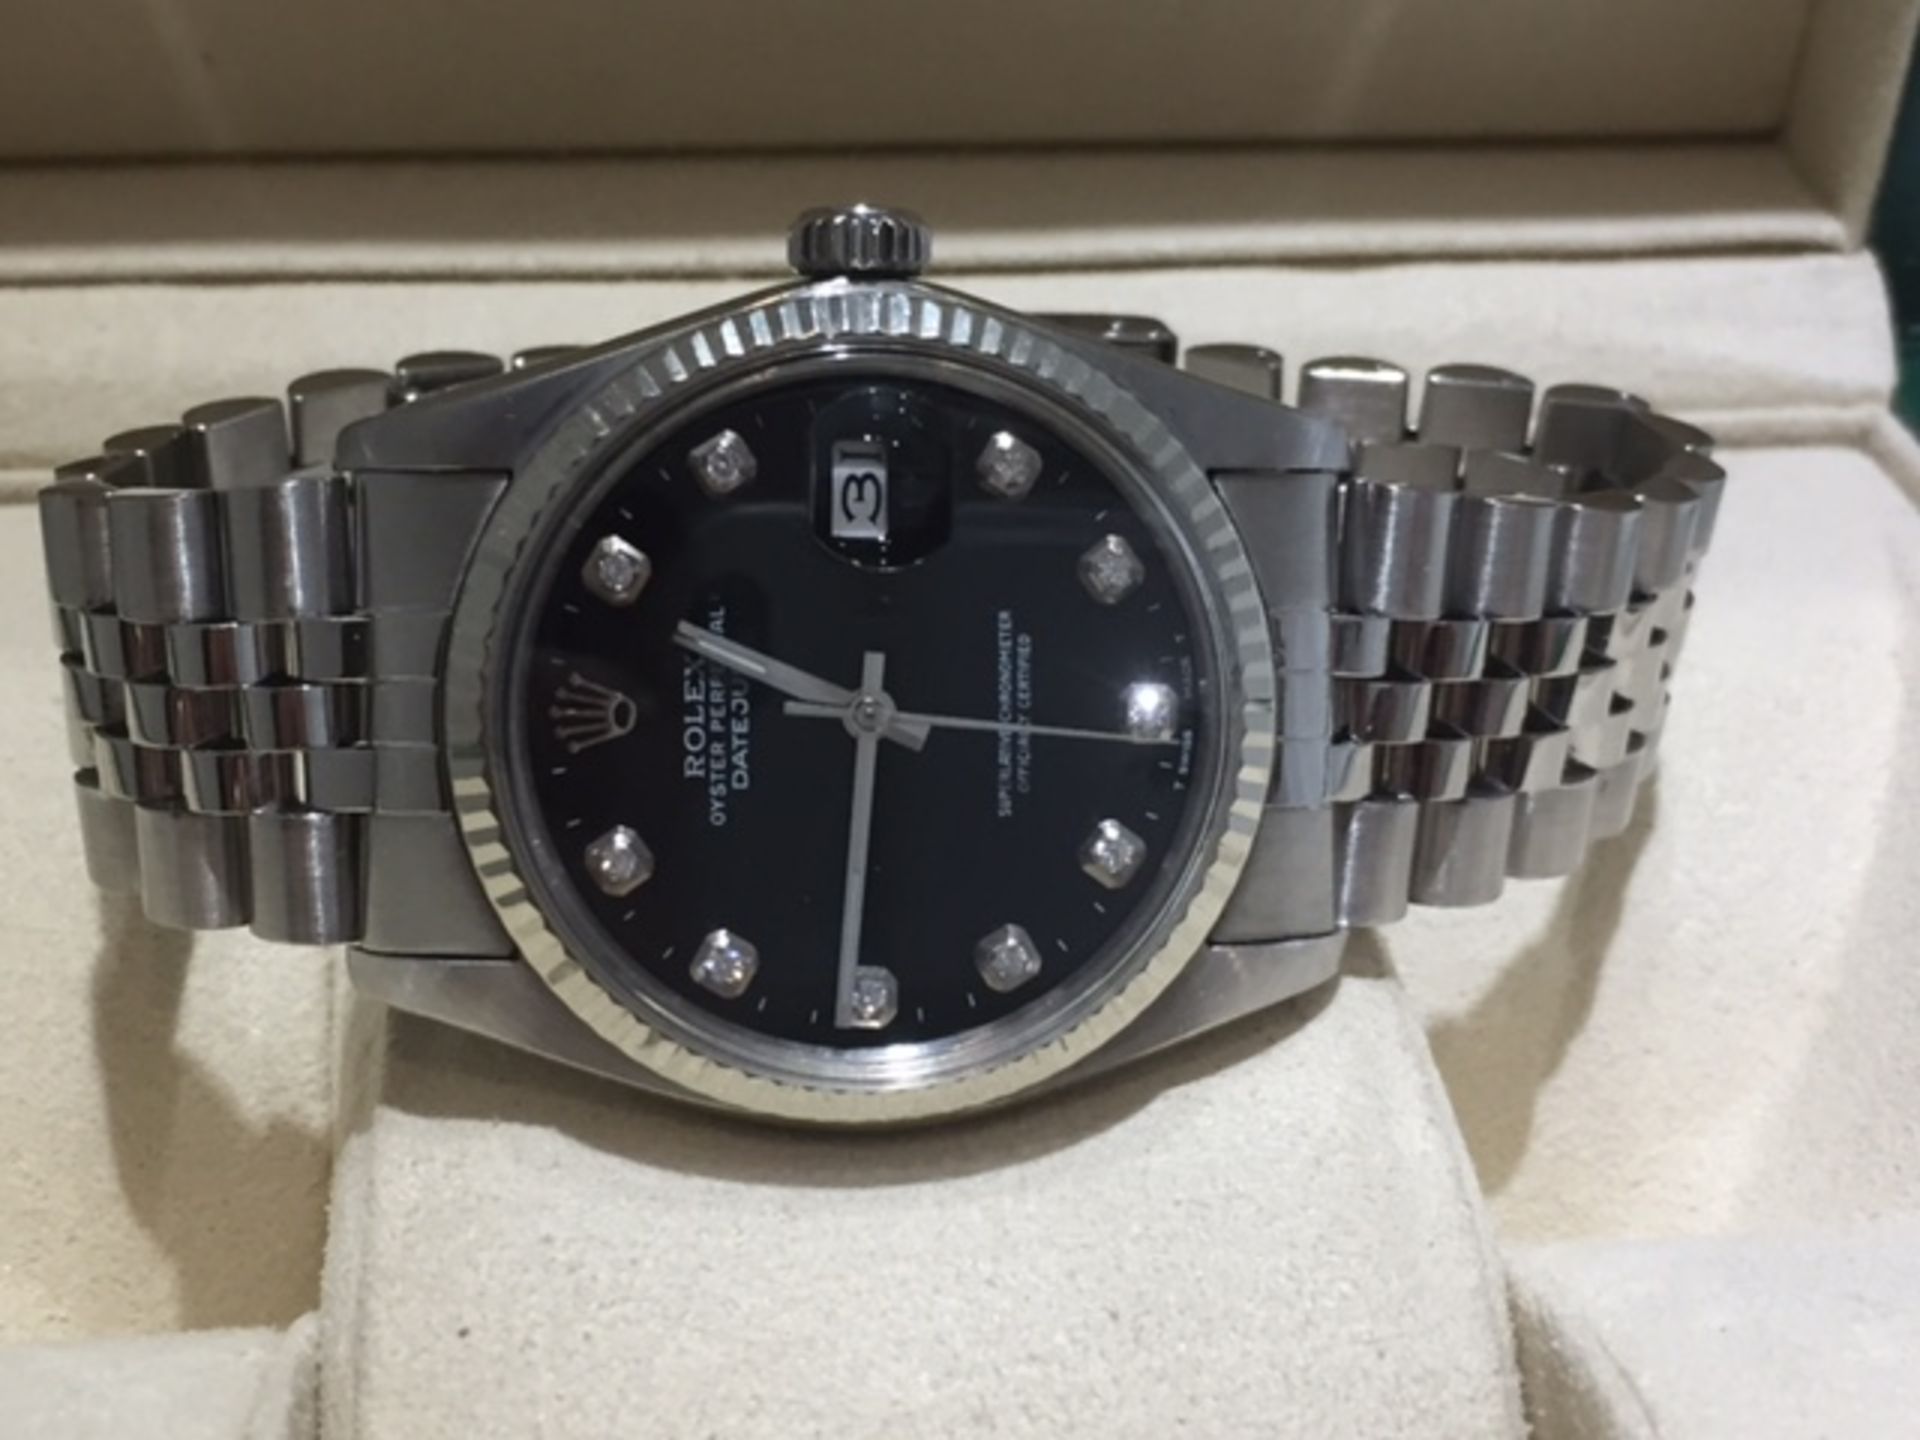 GENTS ROLEX DATE JUST STAINLESS STEEL ON JUBILEE STRAP SET WITH DIAMOND DIAL & FLUTED BEZEL IN - Image 4 of 5